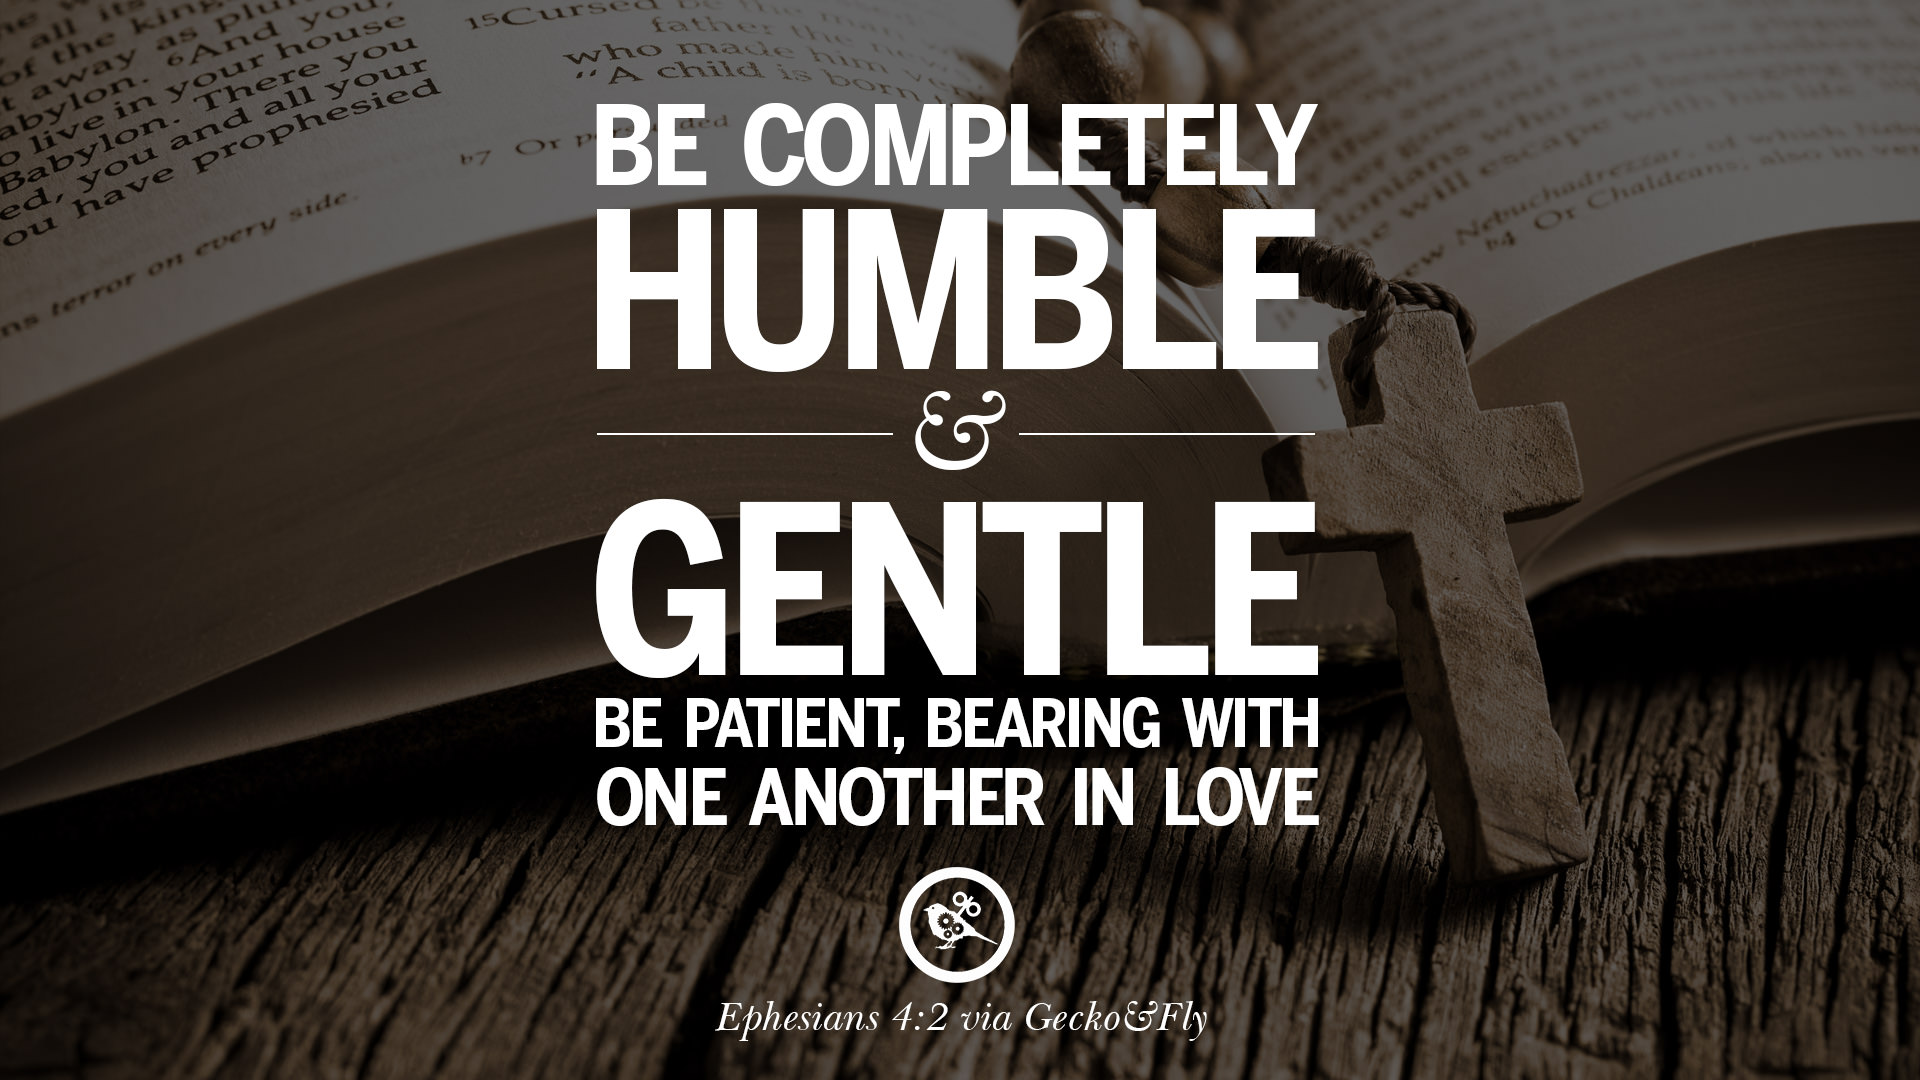 Be pletely humble and gentle be patient bearing with one another in love